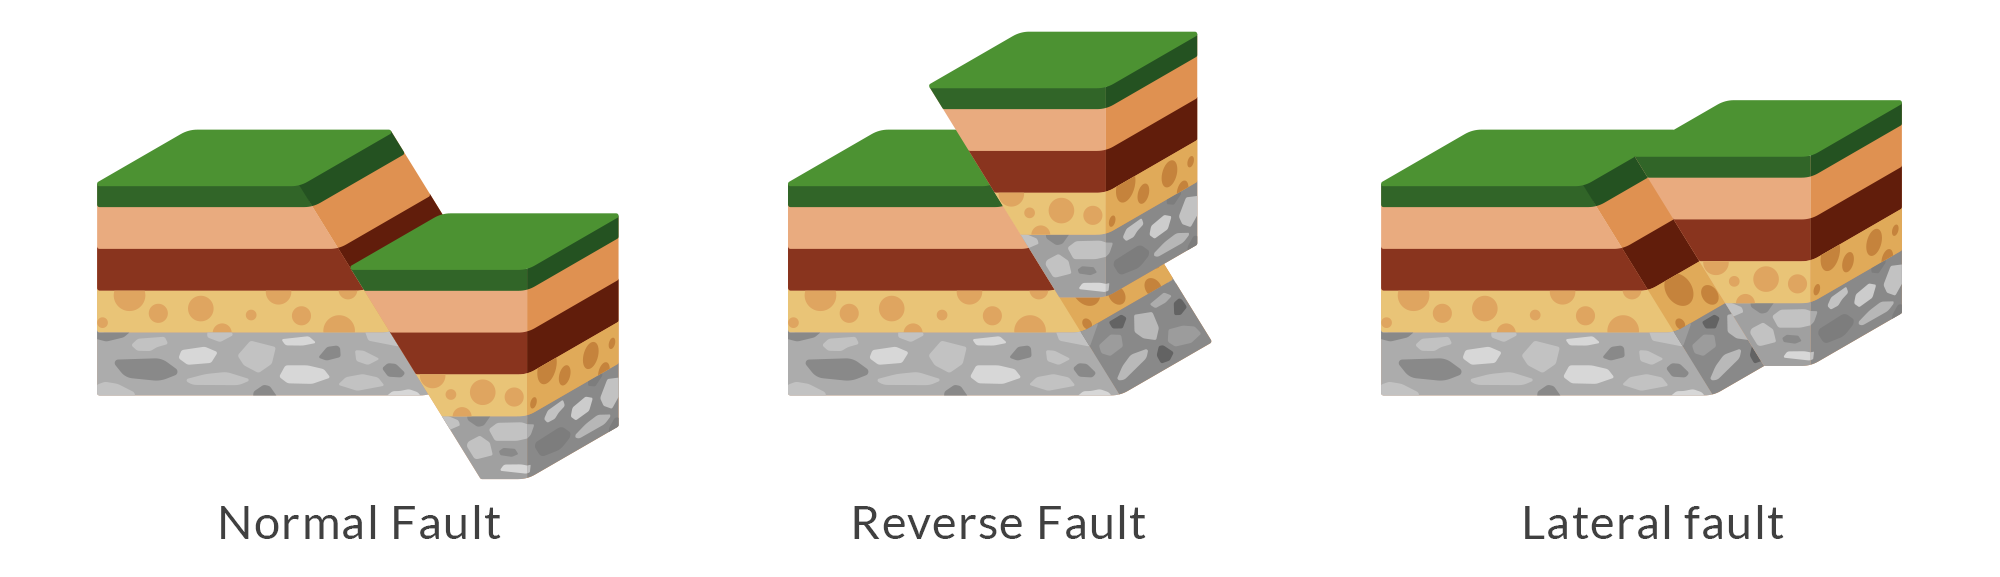 Different types of geological faults